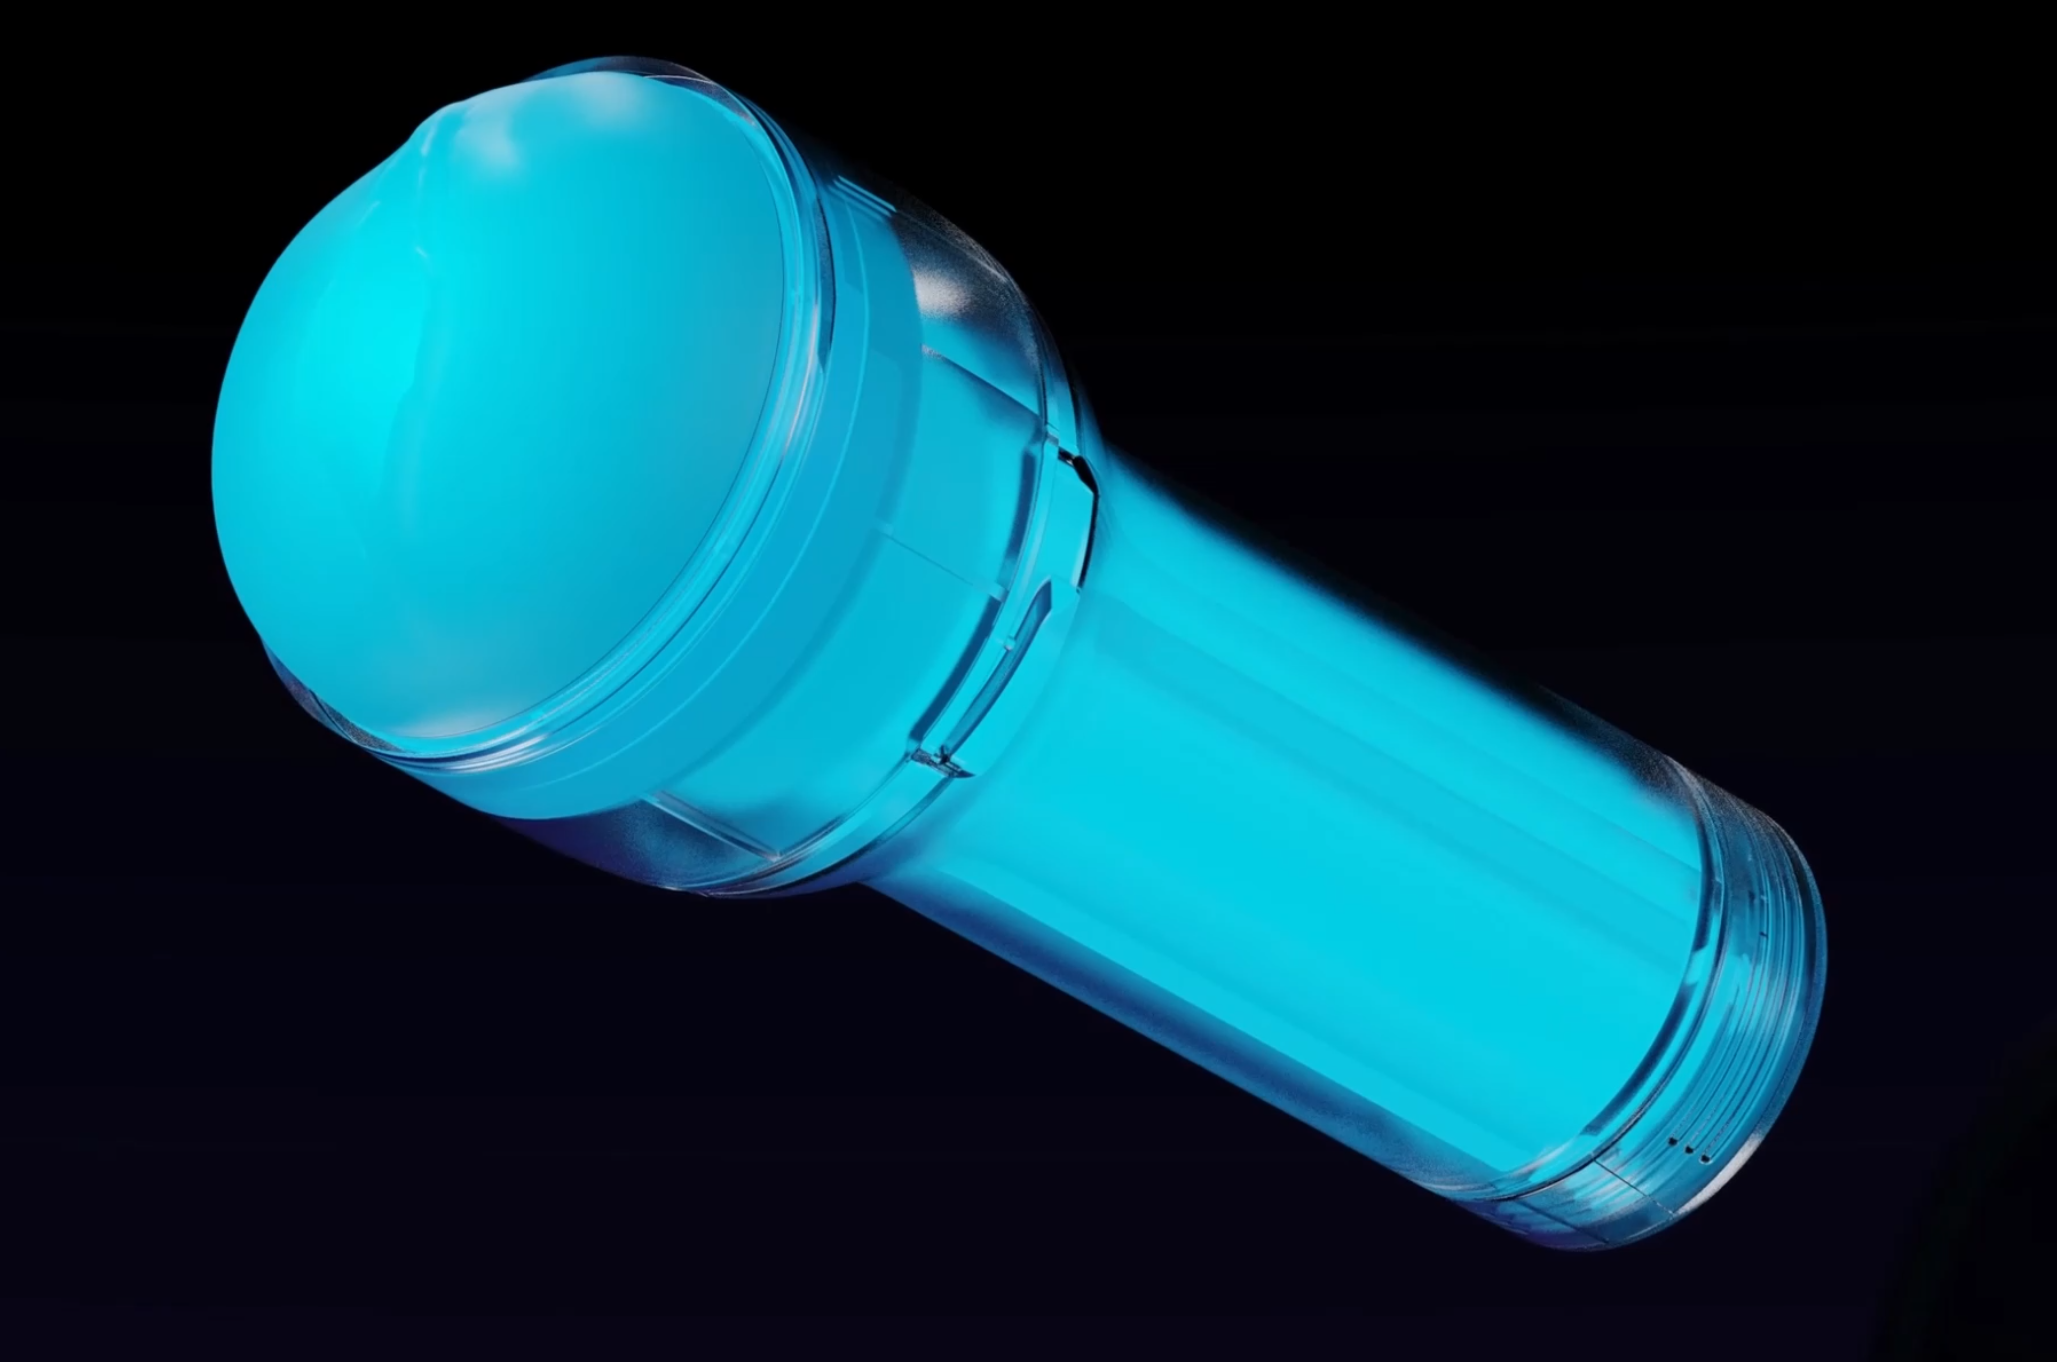 A blue plastic sex toy called FeelGlow on a black background.